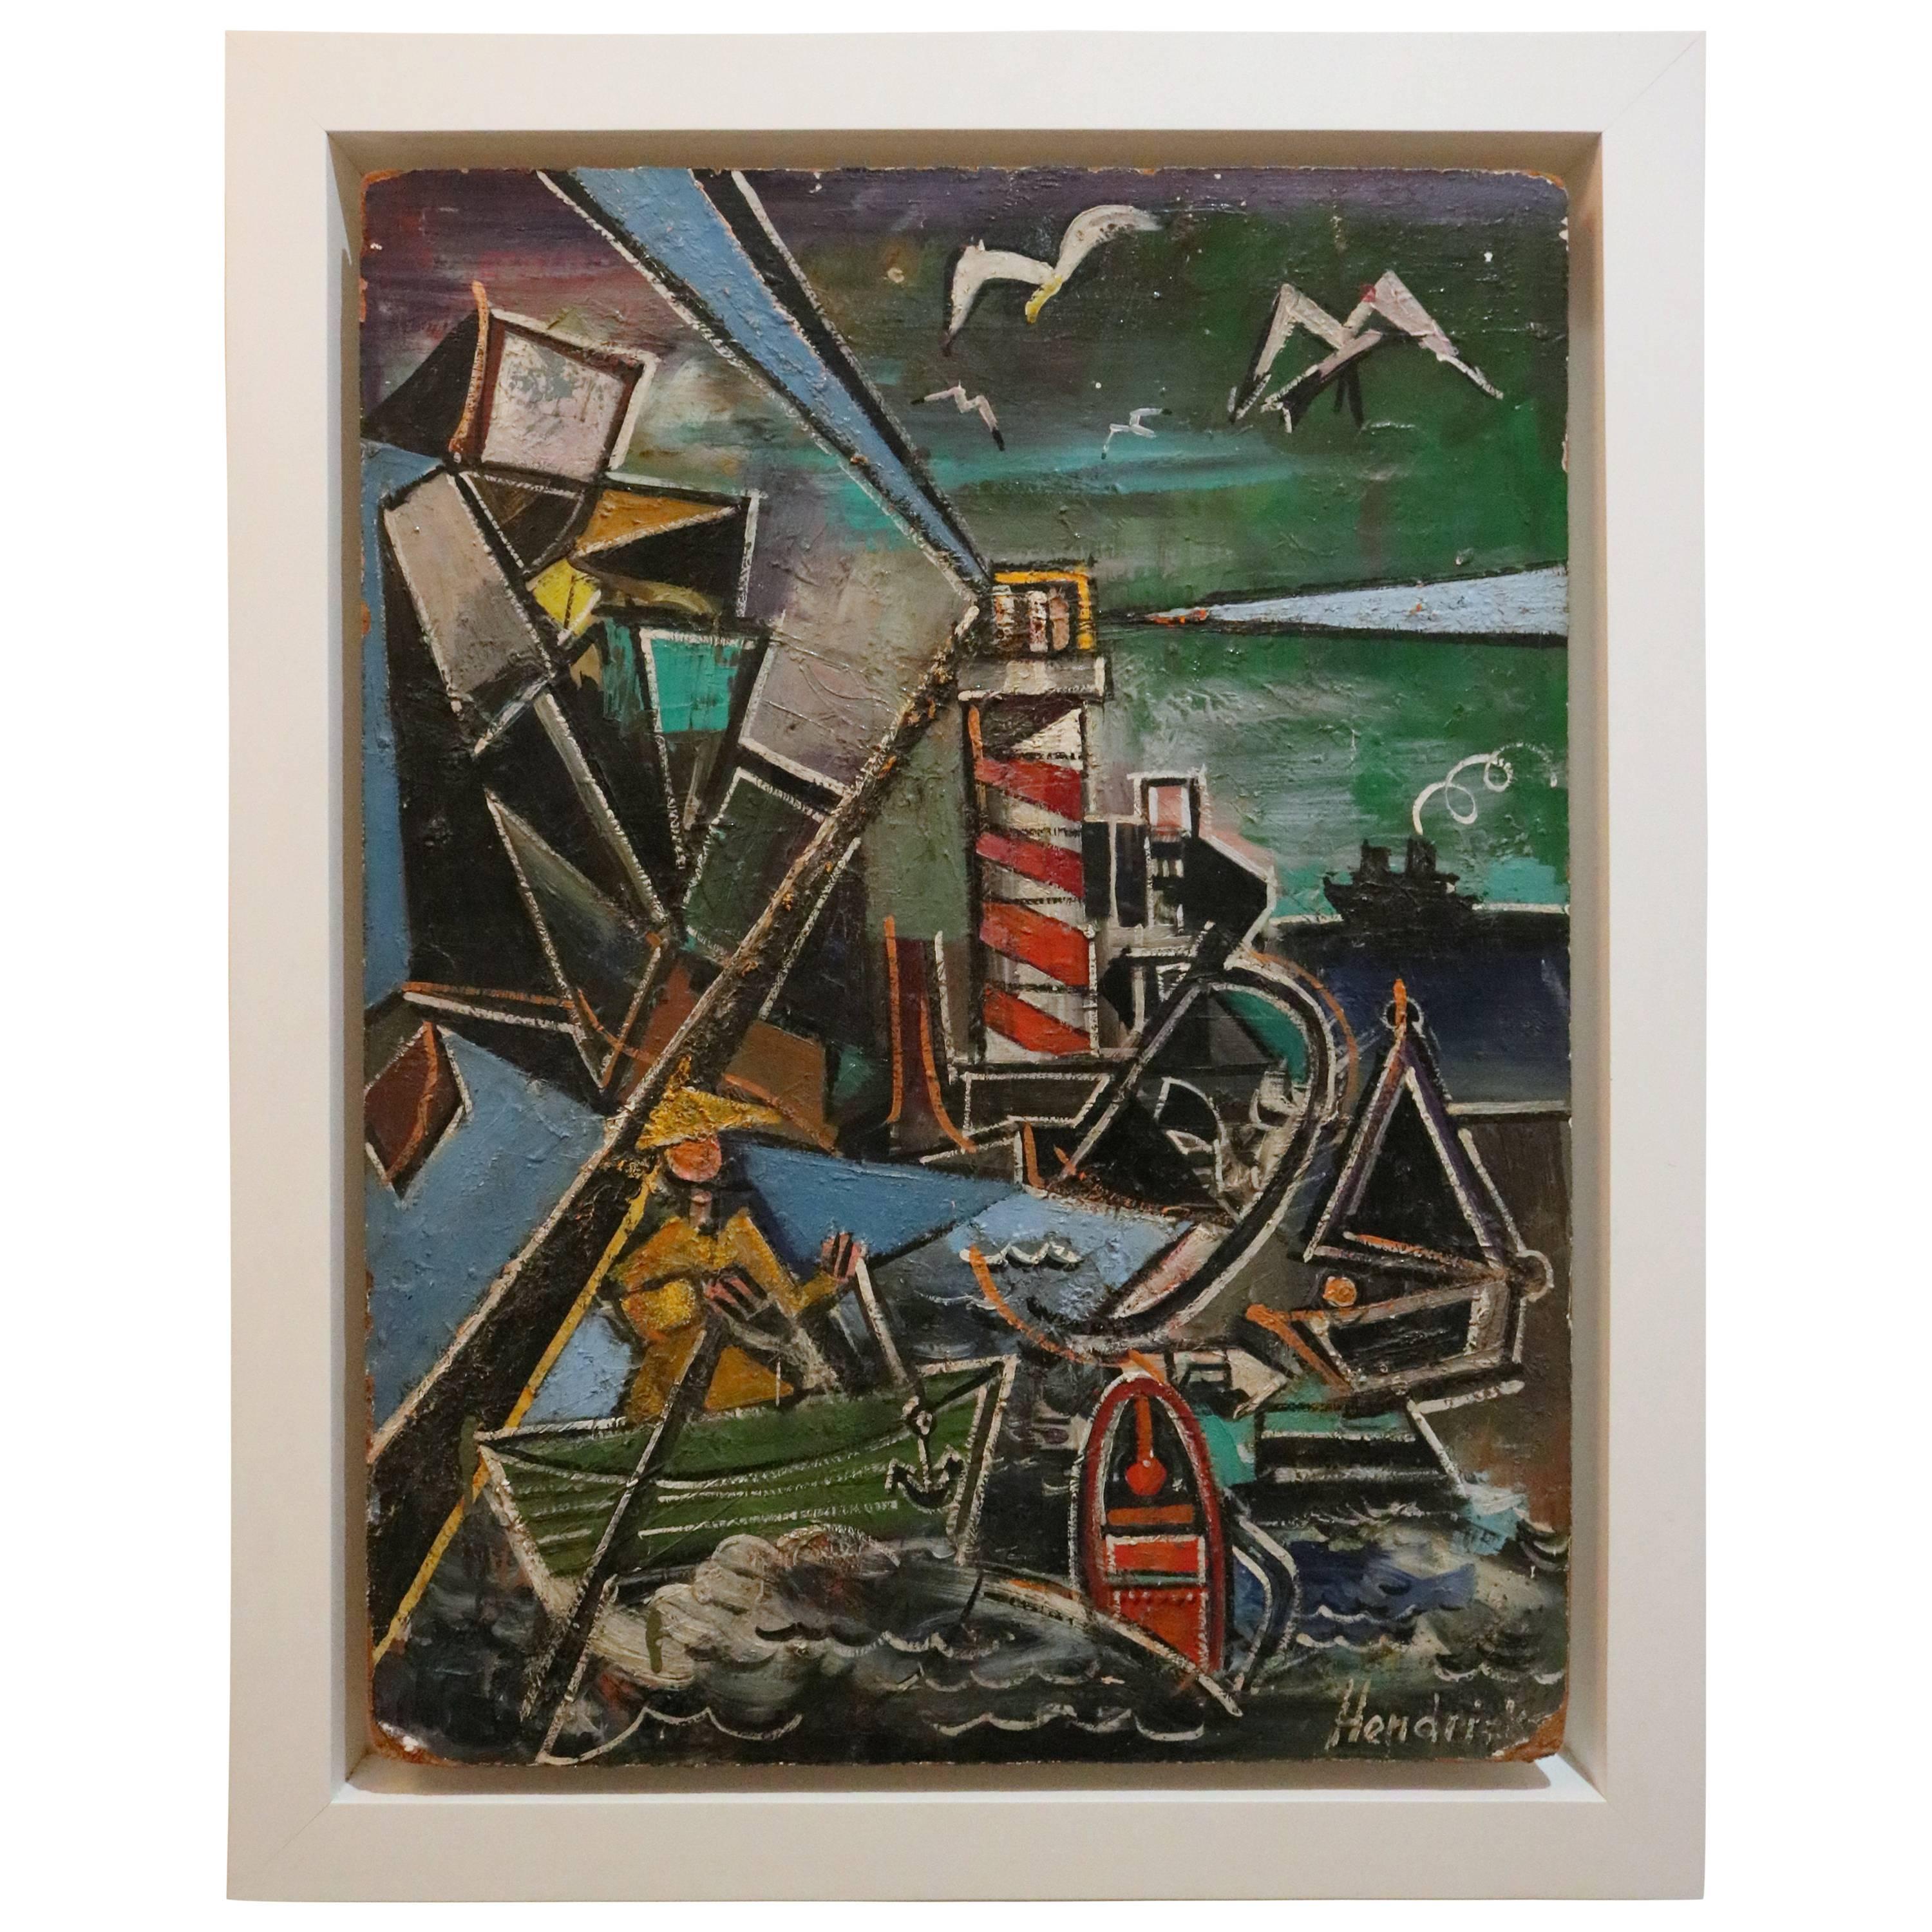 Acrylic on Board Art Deco/Cubist Painting of a Harbor Scene, American, 1930s